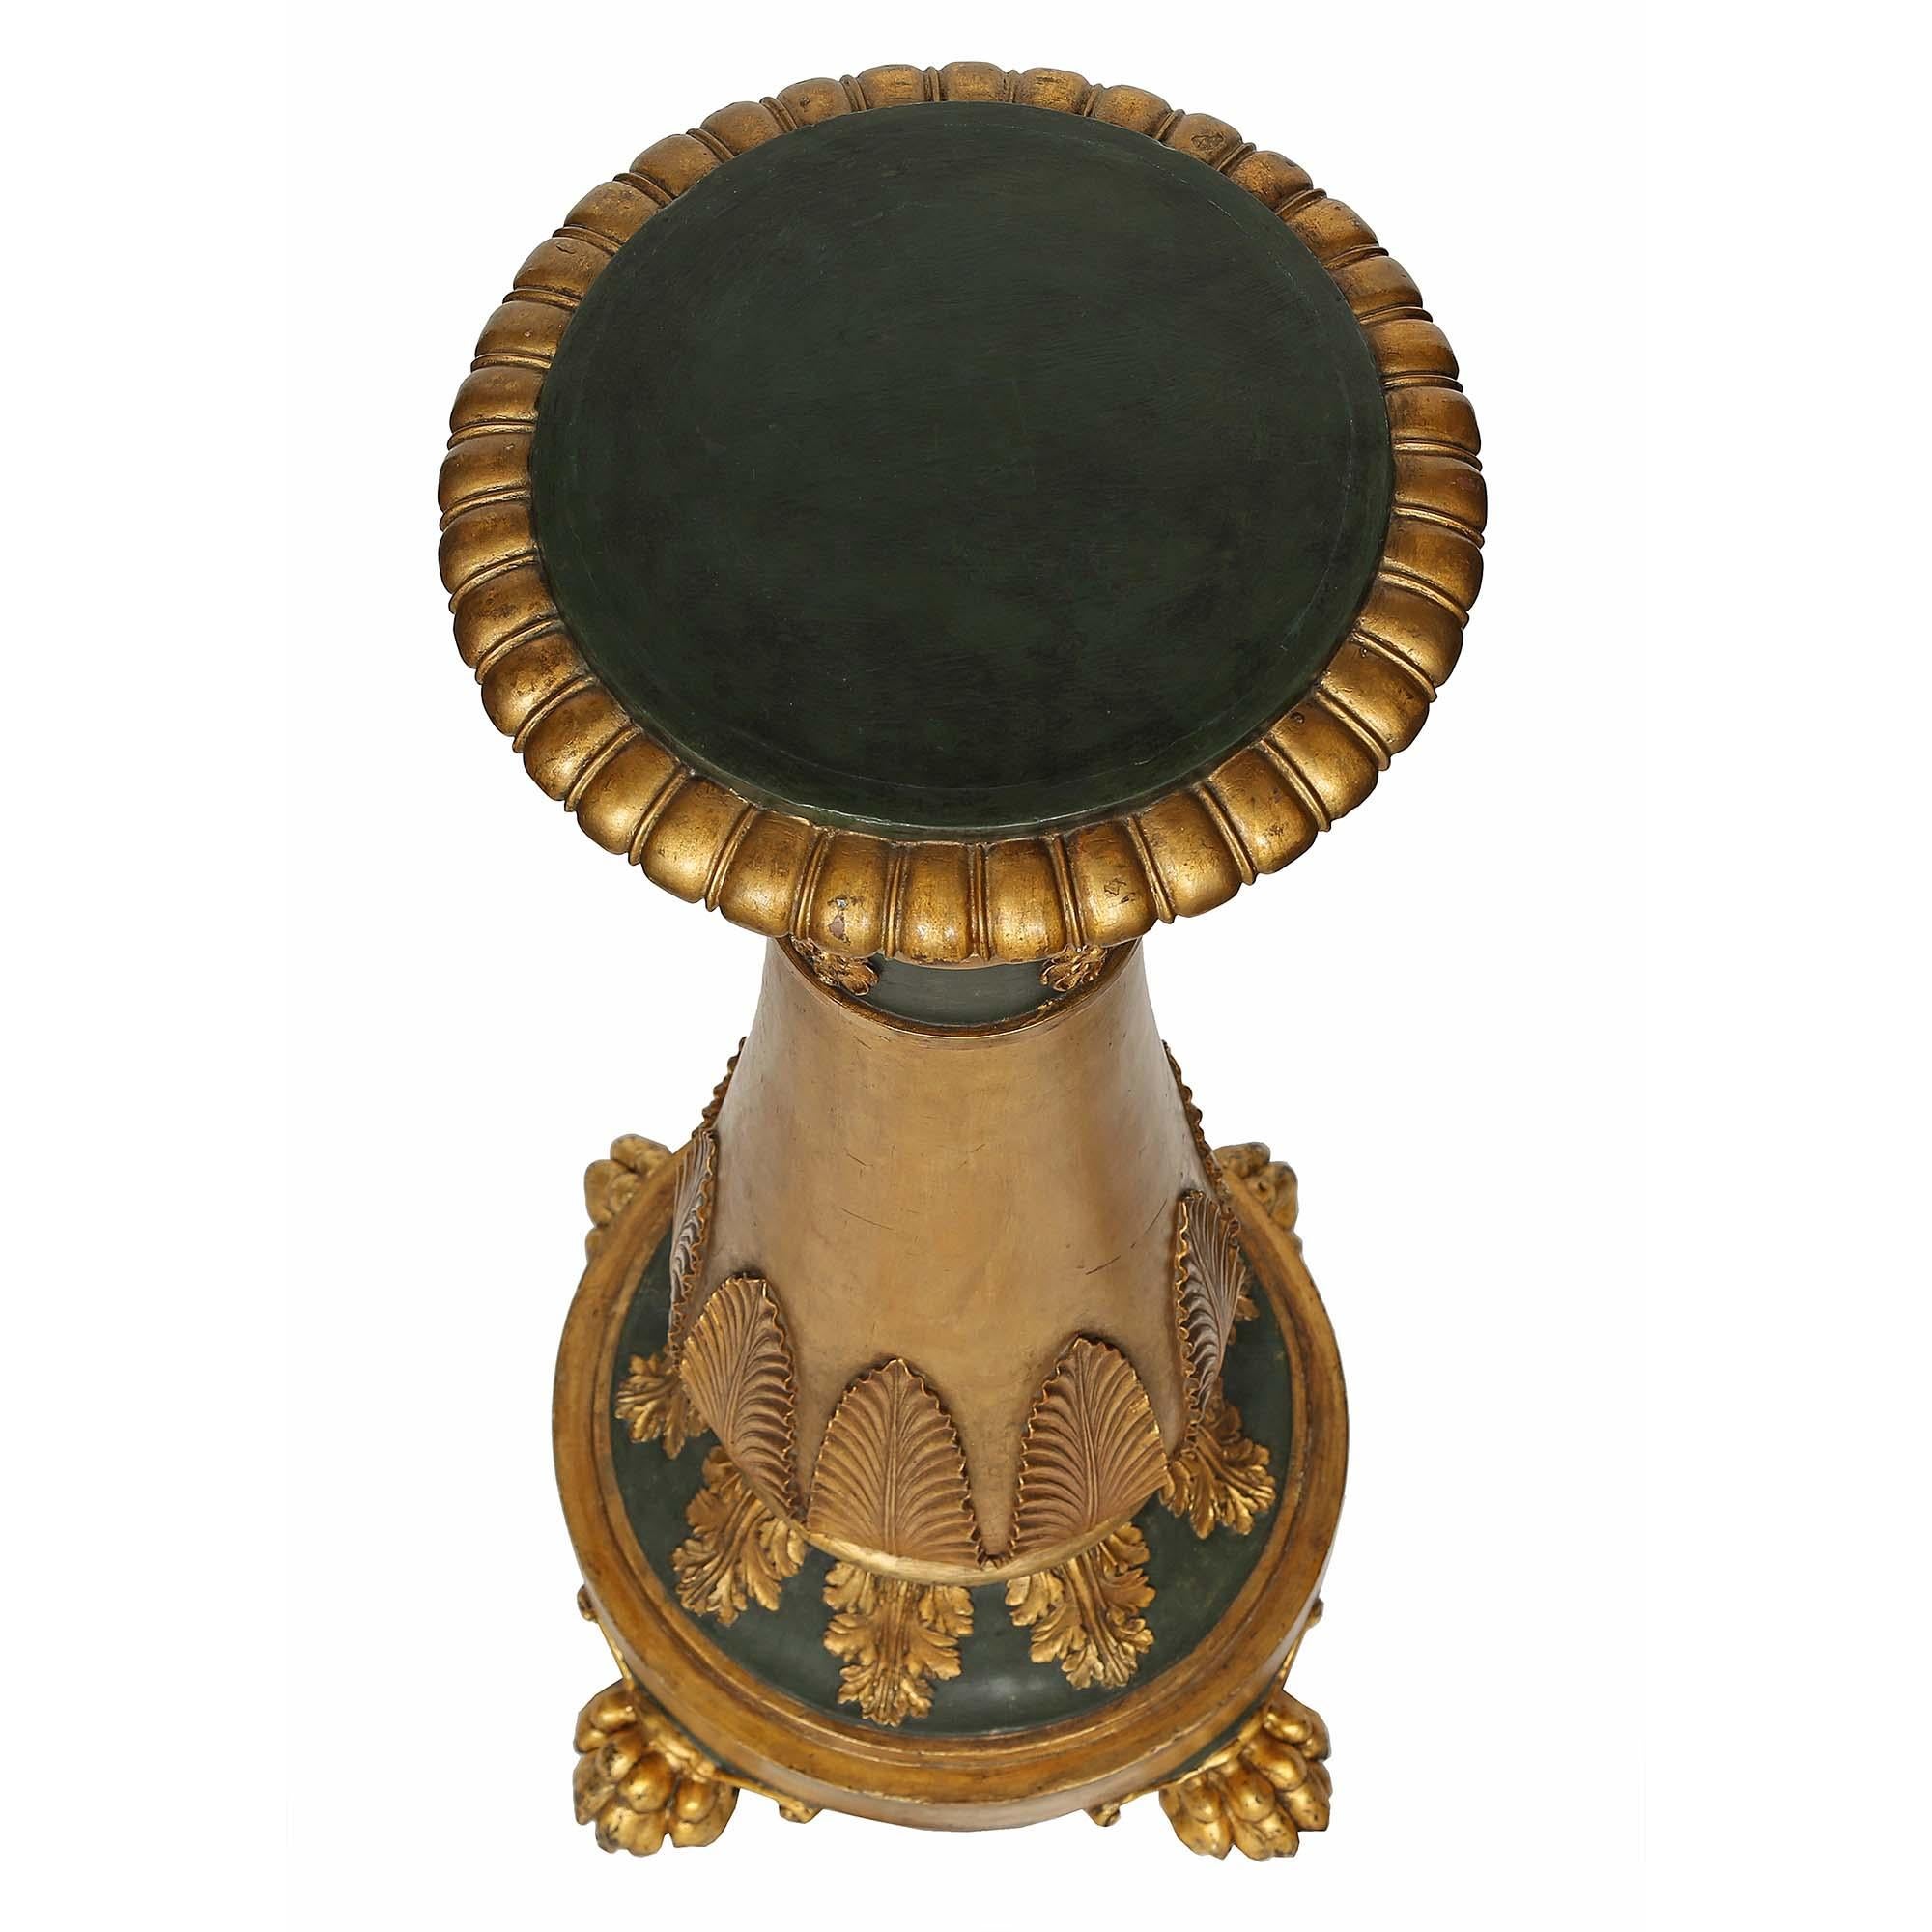 A pair of stunning Italian 19th century neo-classical st. giltwood pedestals. Each is raised on four finely carved paw feet below a circular base. The forest green patinated socle is adorned with finely carved giltwood acanthus leaves. The baluster